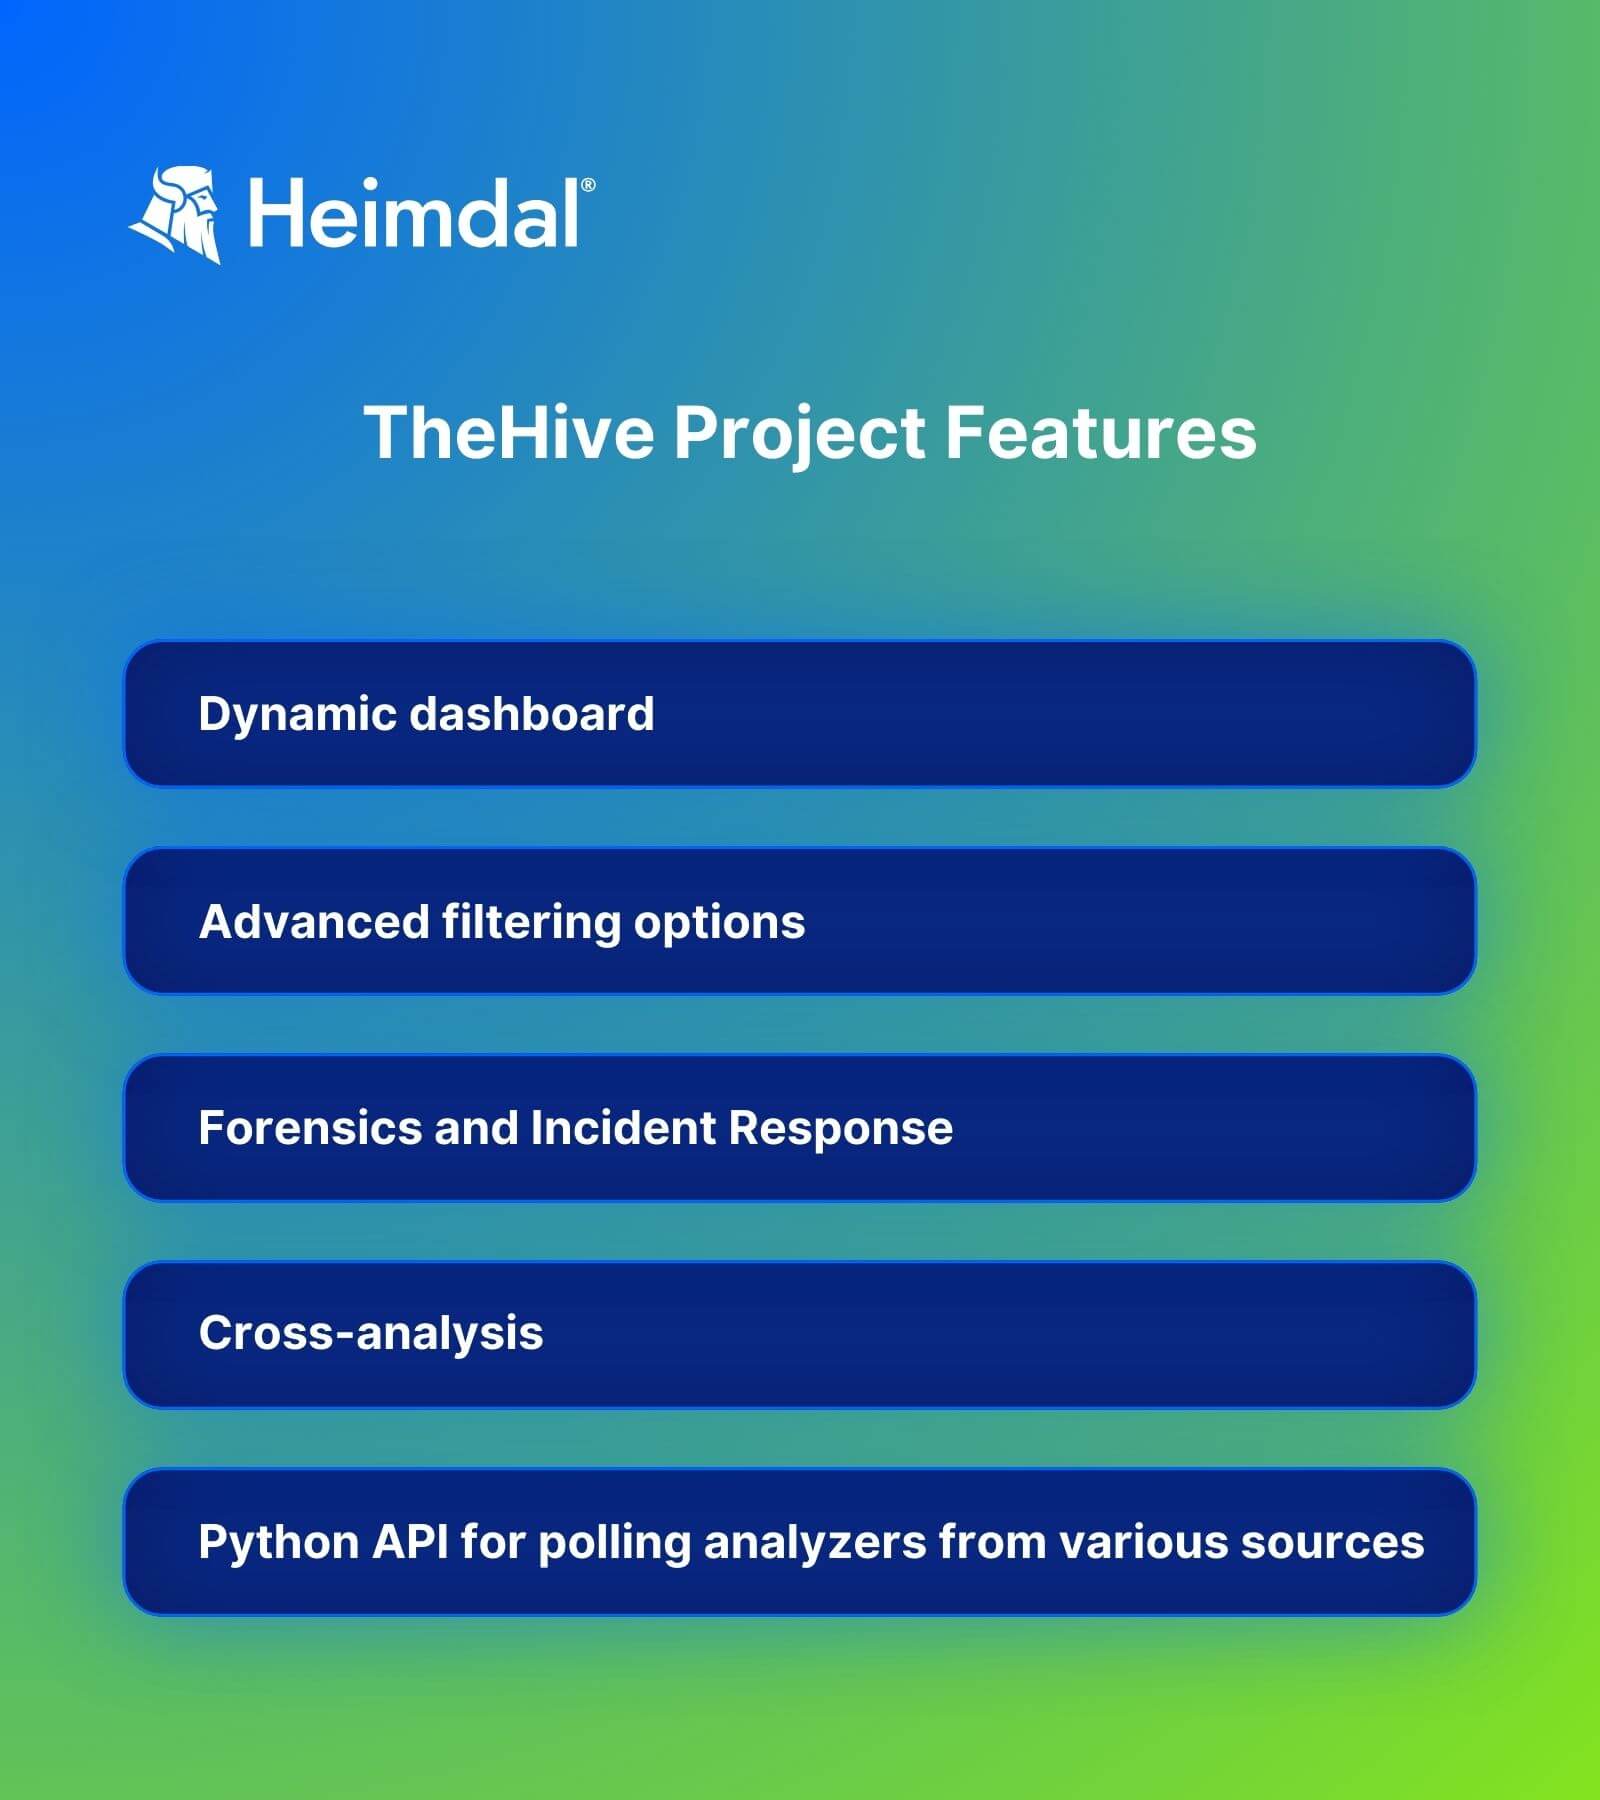 TheHive Project Features